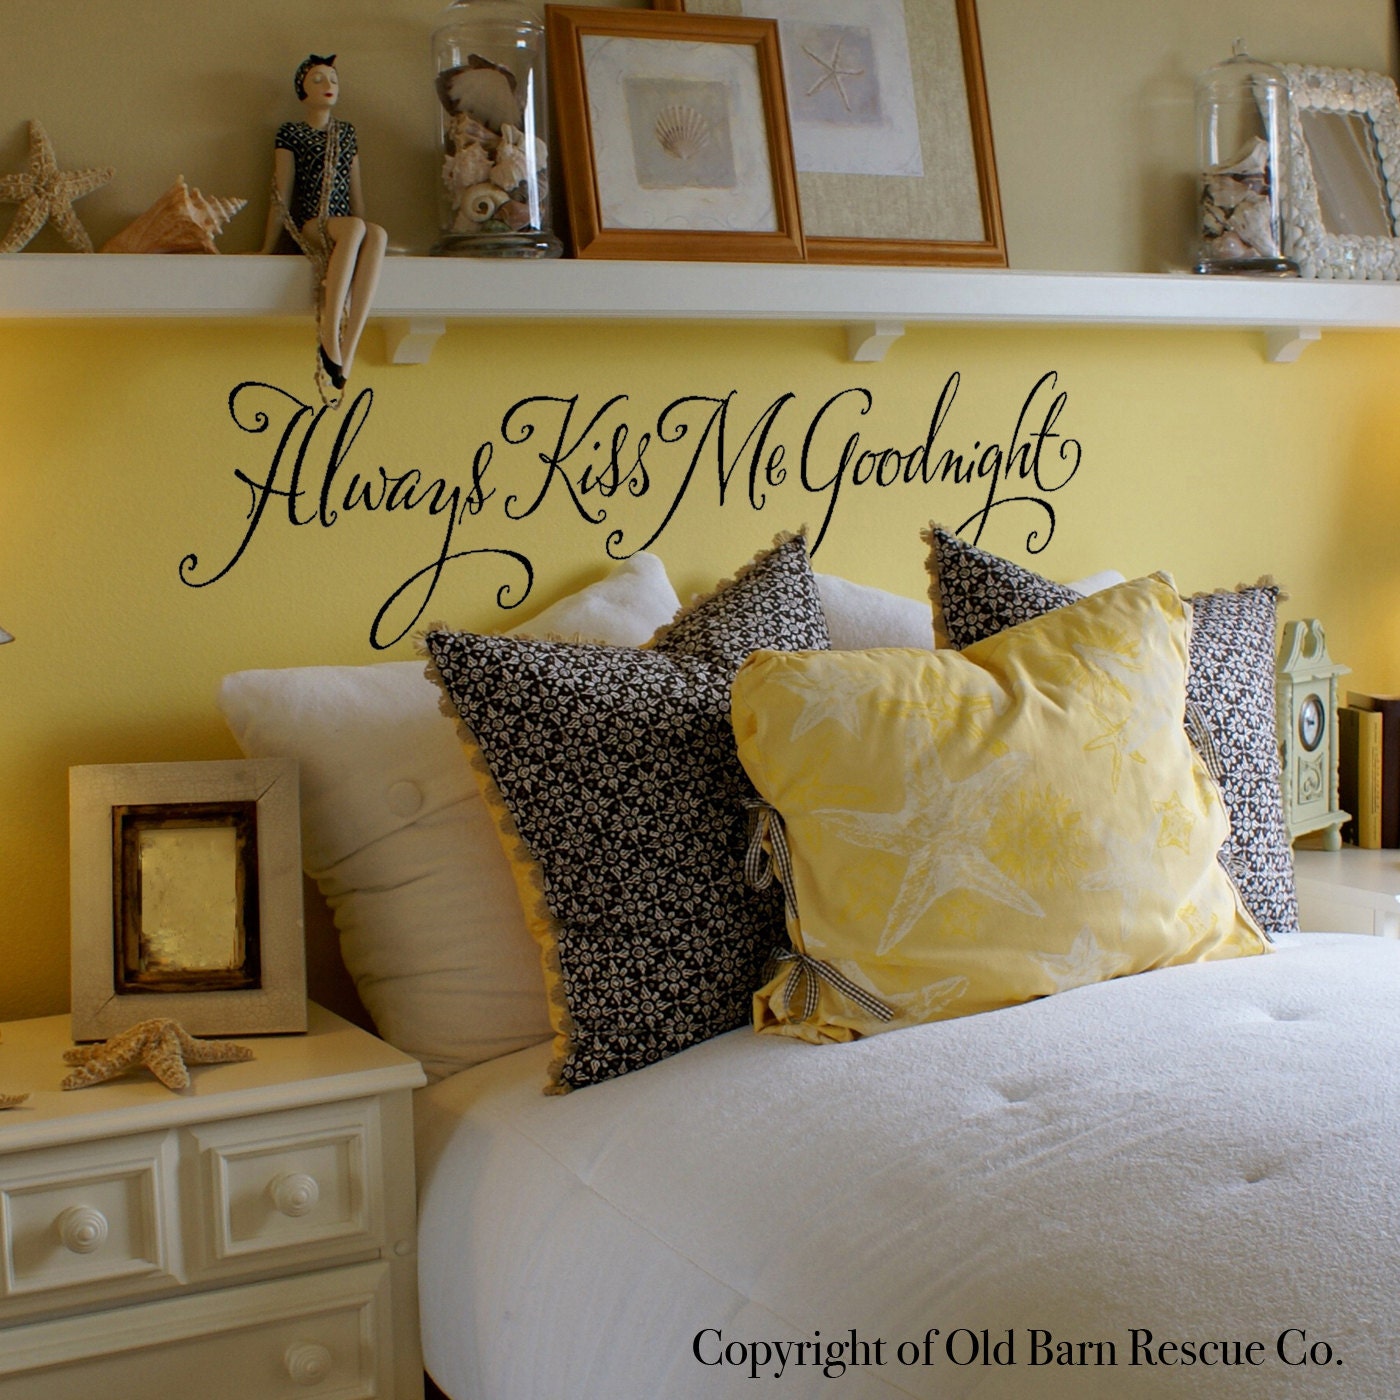 Always Kiss Me Goodnight - romantic wall words vinyl home decor lettering graphic calligraphy old barn rescue company